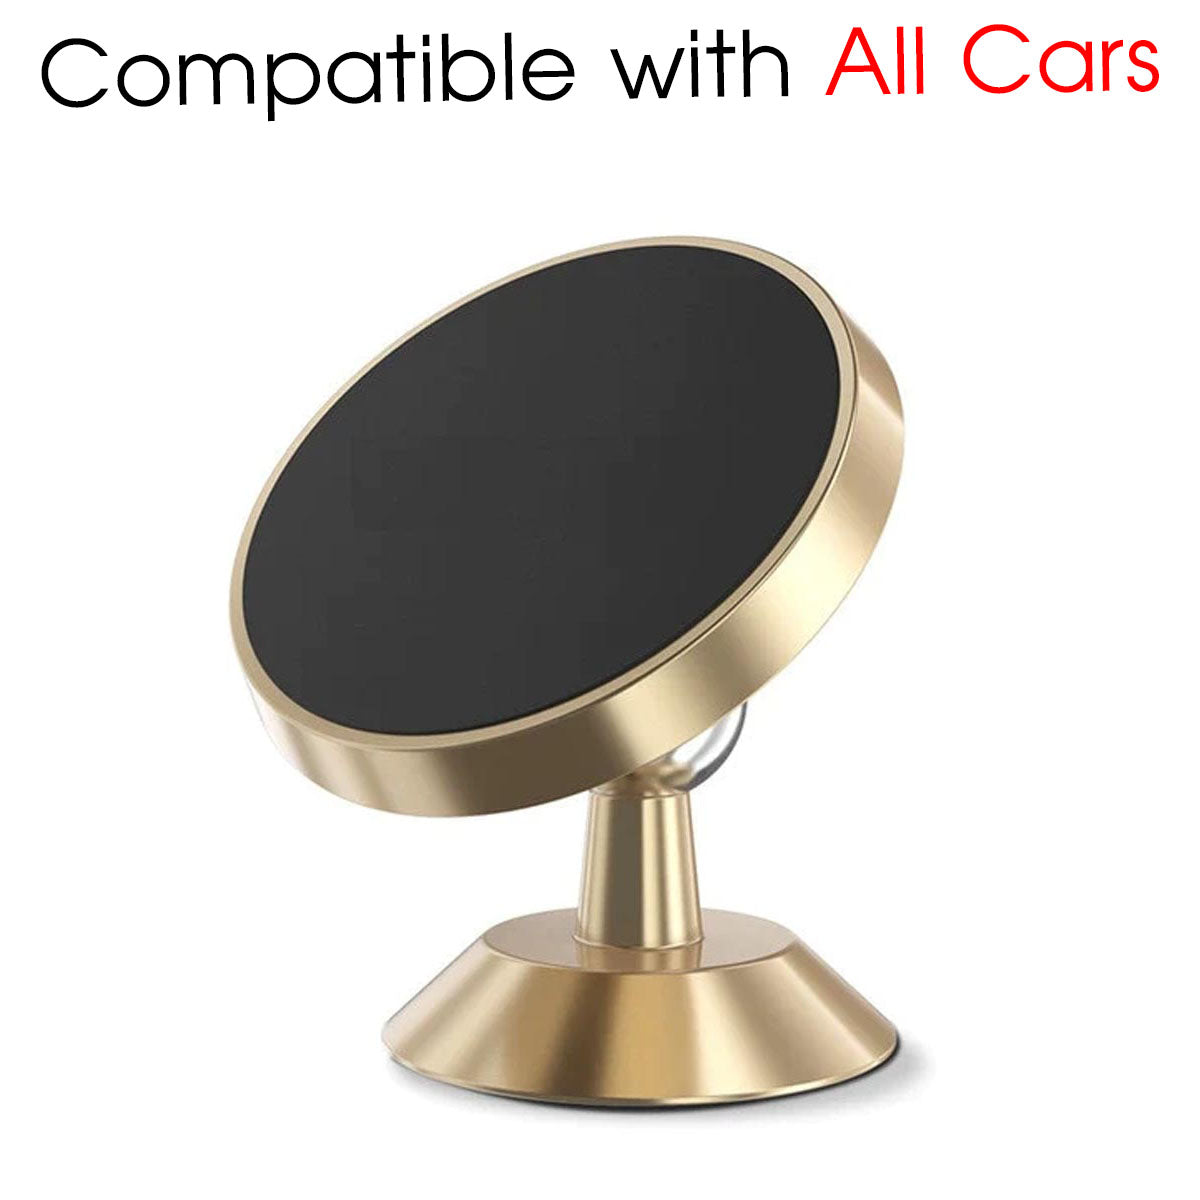 [2 Pack ] Magnetic Phone Mount, Custom For Your Cars, [ Super Strong Magnet ] [ with 4 Metal Plate ] car Magnetic Phone Holder, [ 360° Rotation ] Universal Dashboard car Mount Fits All Cell Phones, Car Accessories MB13982